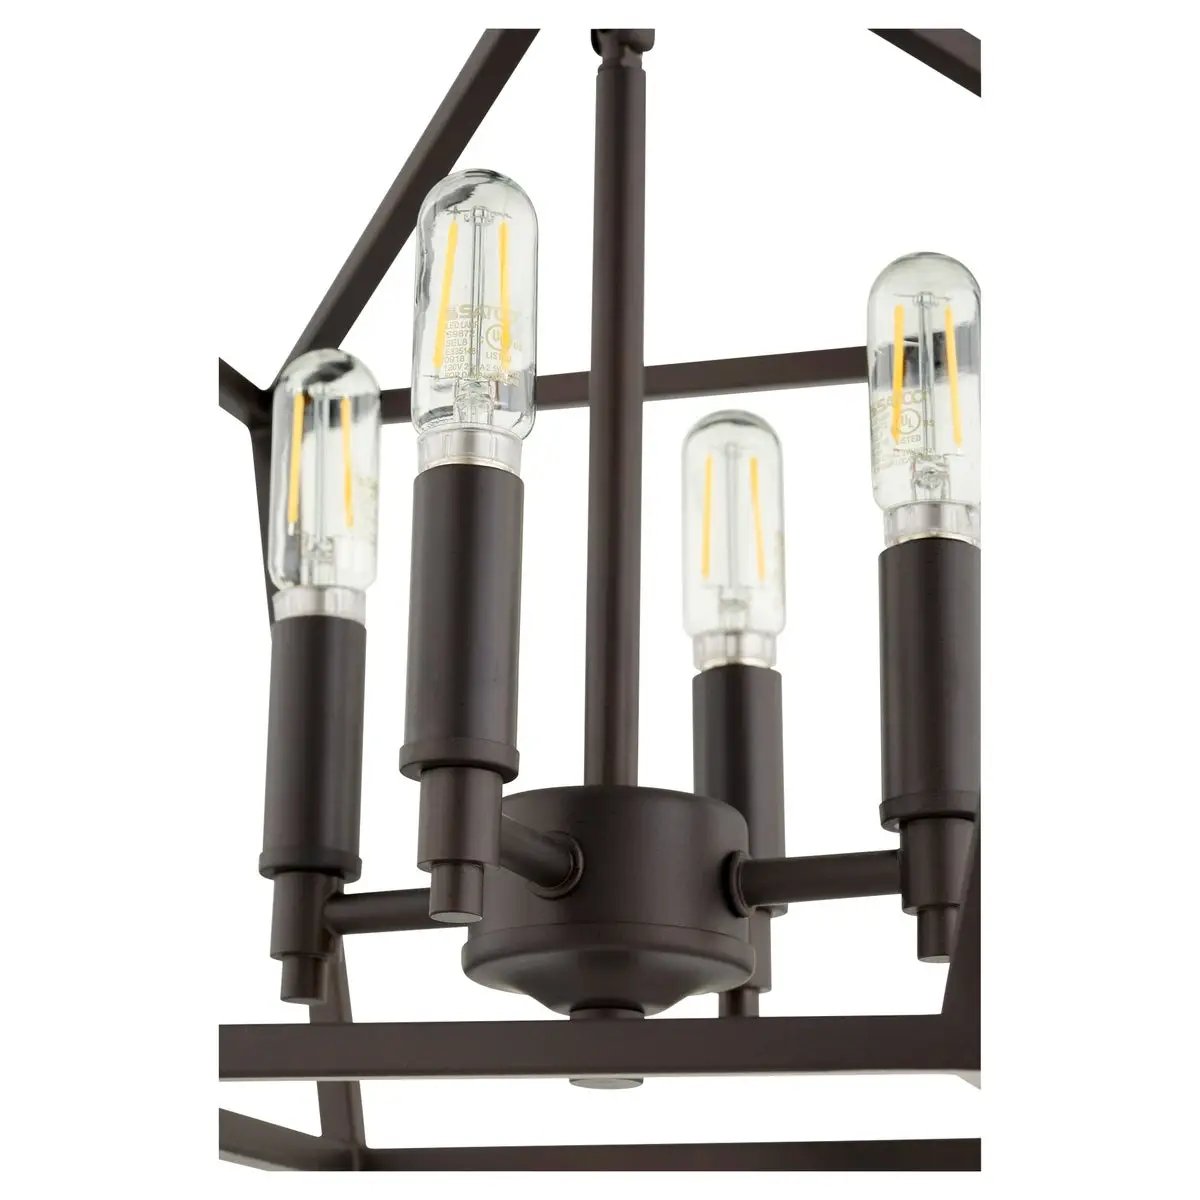 Semi Flush Farmhouse Light with open tapered shade, perfect for modern-farmhouse kitchens or traditional living rooms. Candelabra bulbs provide ample illumination. Quorum International, 60W, 4 bulbs, UL Listed, 13"W x 13.75"H.